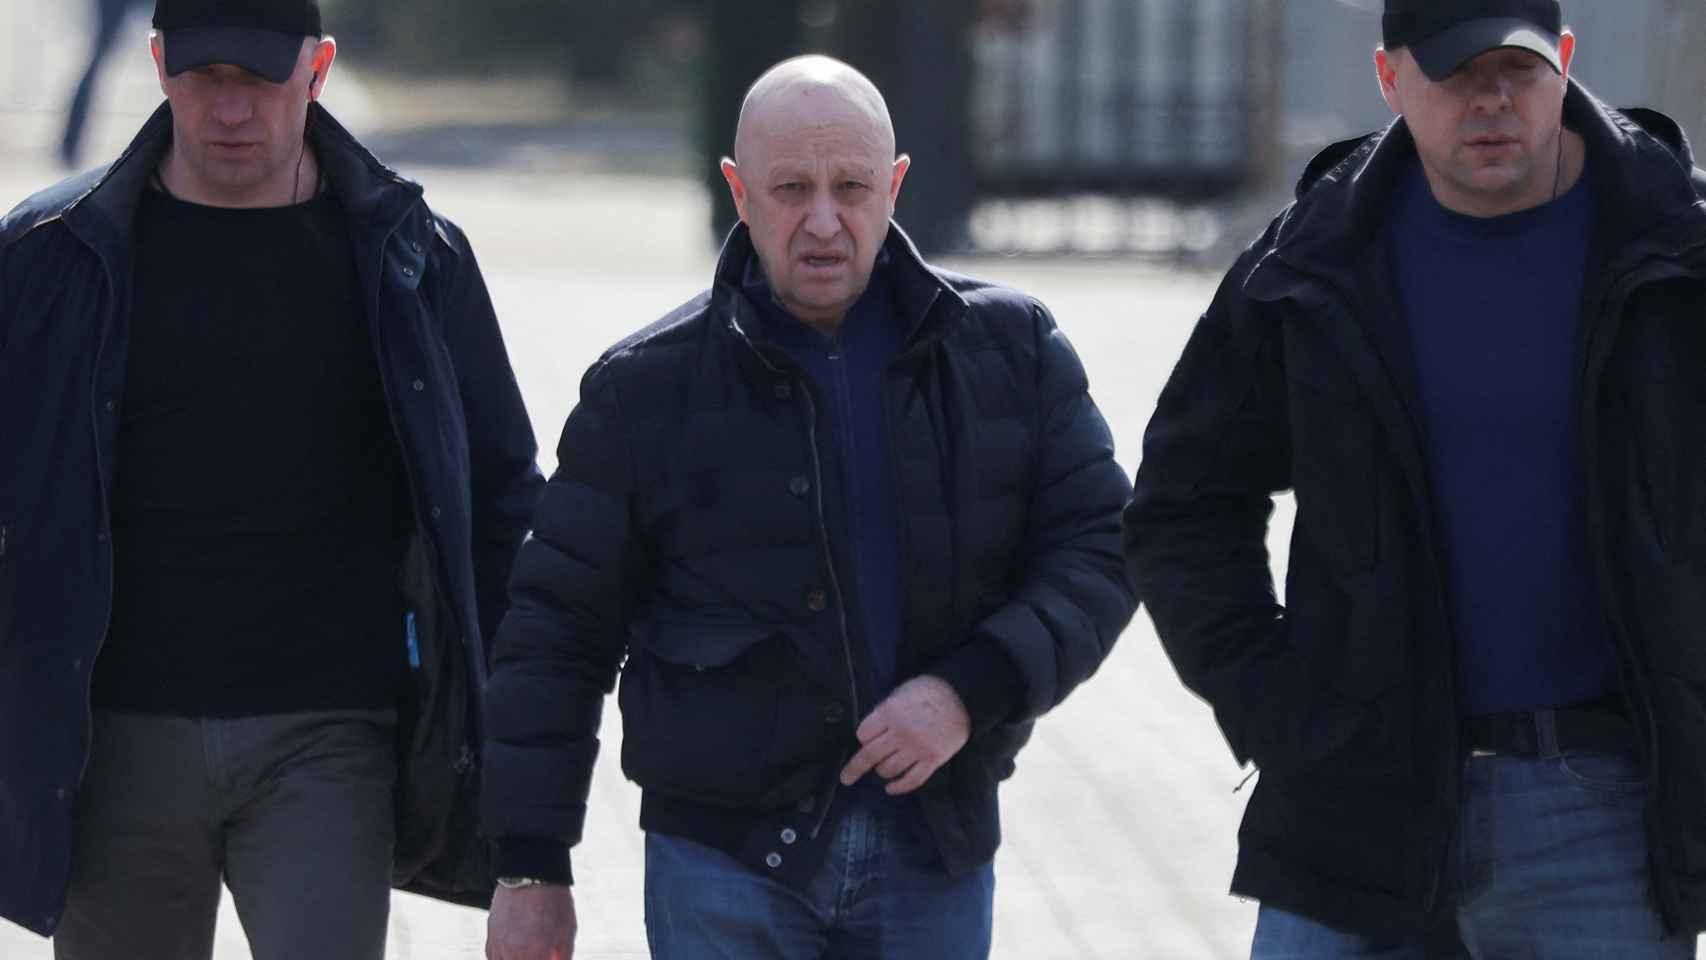 Leader of the Wagner Group, Yevgeny Prigozhin, is escorted to the funeral.